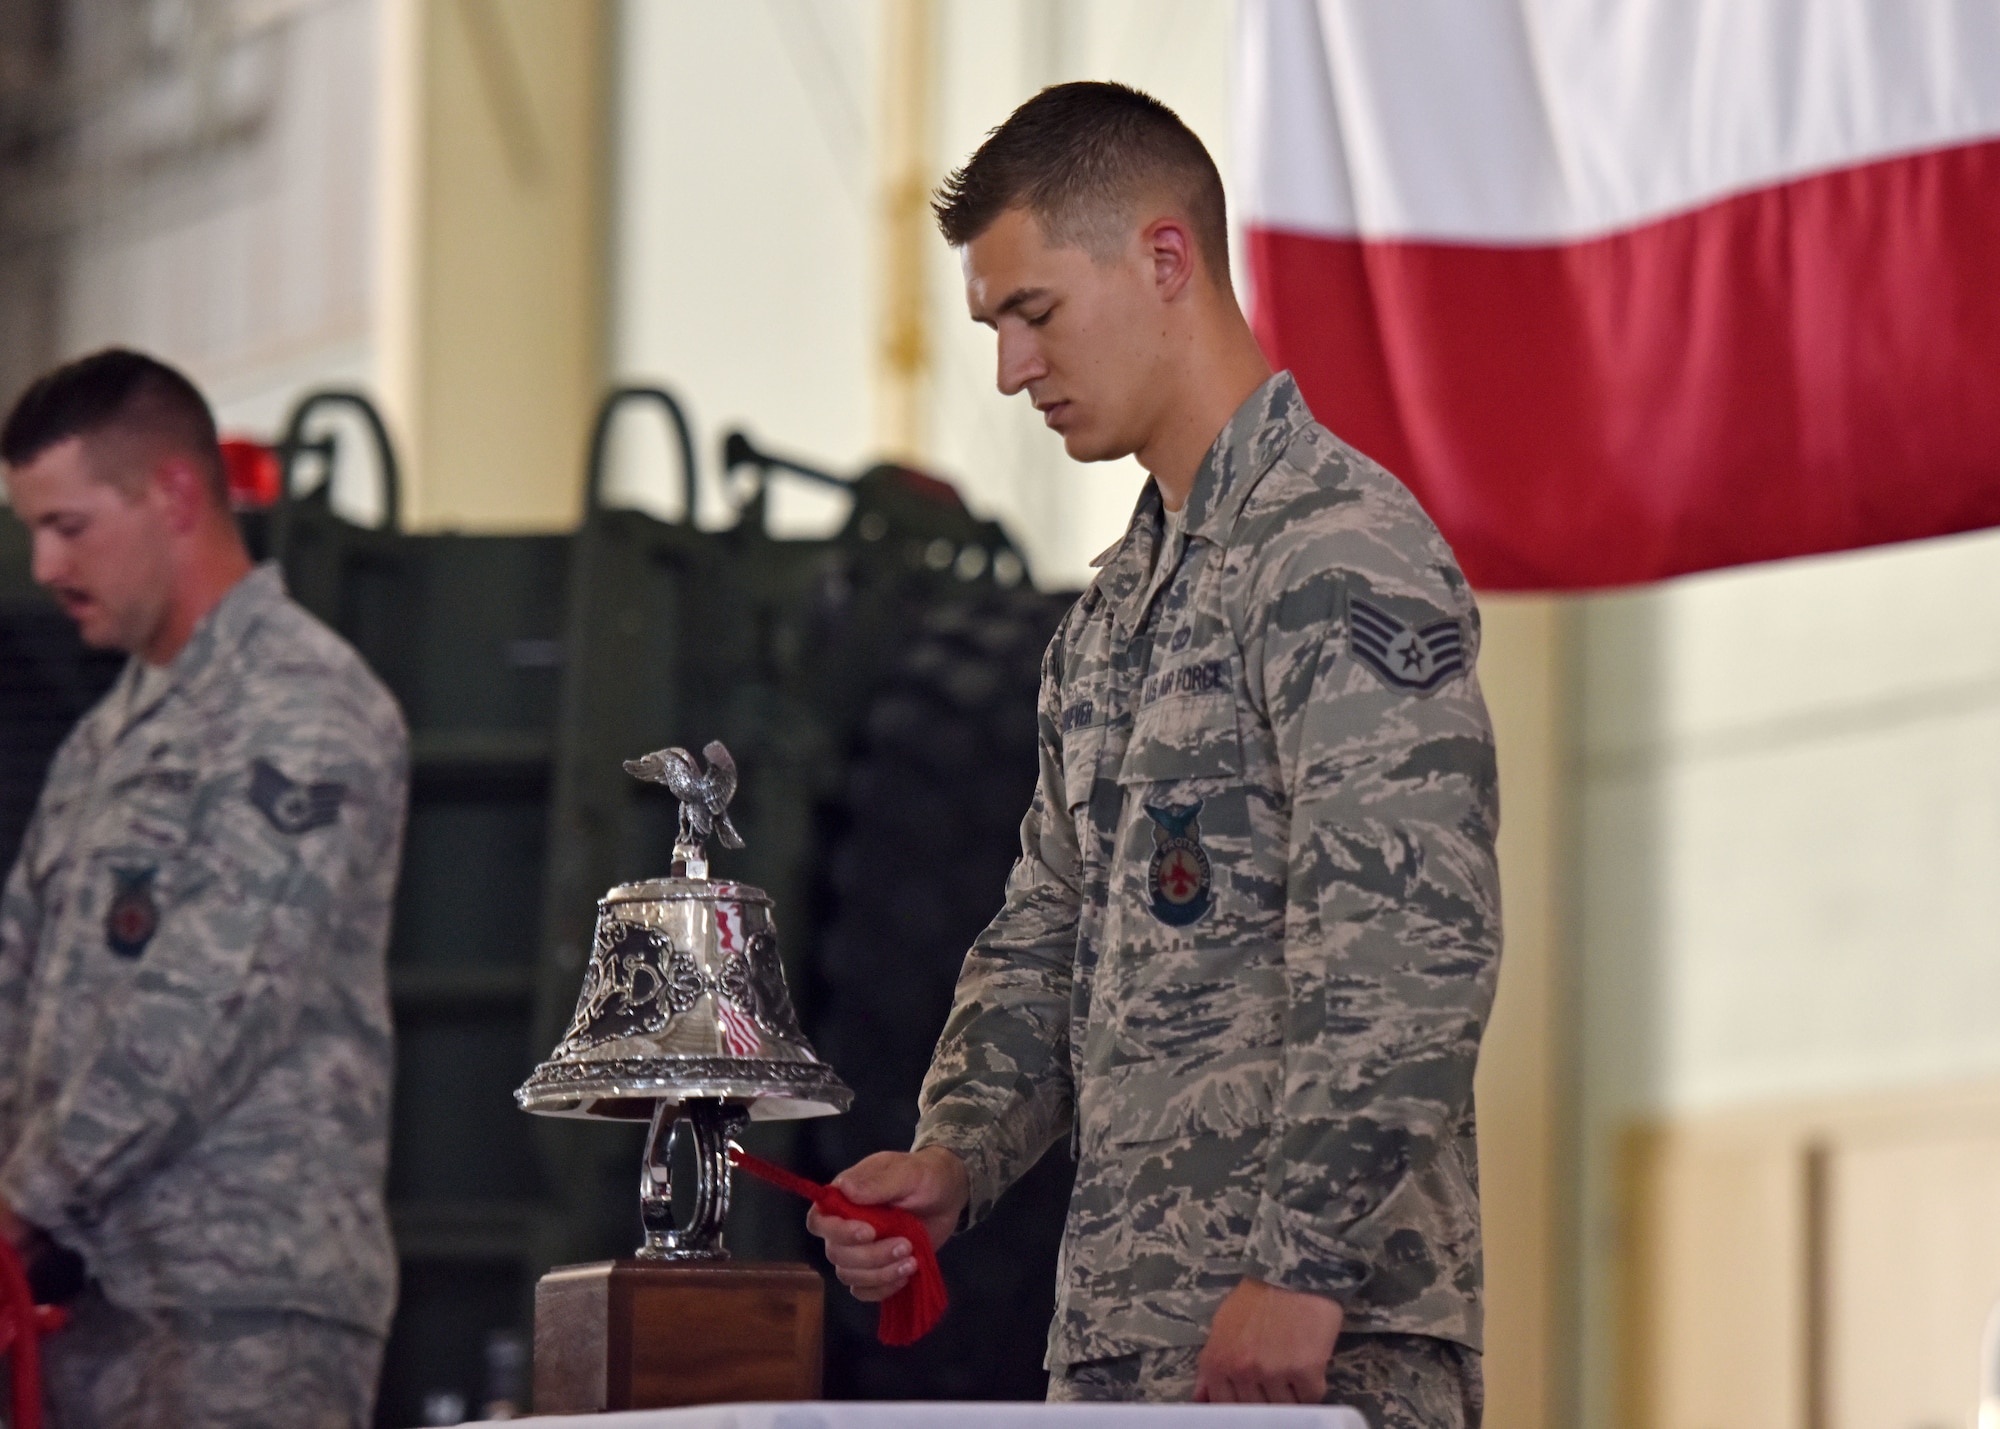 U.S. Air Force Staff Sgt. Alec Shiever, 312th Training Squadron instructor, rings a bell five times, three times in a row to honor those who gave the ultimate sacrifice during the events of 9/11 at the Firefighter Remembrance Ceremony in the Department of Defense Louis F. Garland Fire Academy on Goodfellow Air Force Base, Texas, Sept. 11, 2019. It is a firefighter tradition to ring a bell to symbolize work is done and firefighters will be returning to quarters or to honor those who have fallen in the line of duty. (U.S. Air Force photo by Senior Airman Seraiah Wolf/Released)